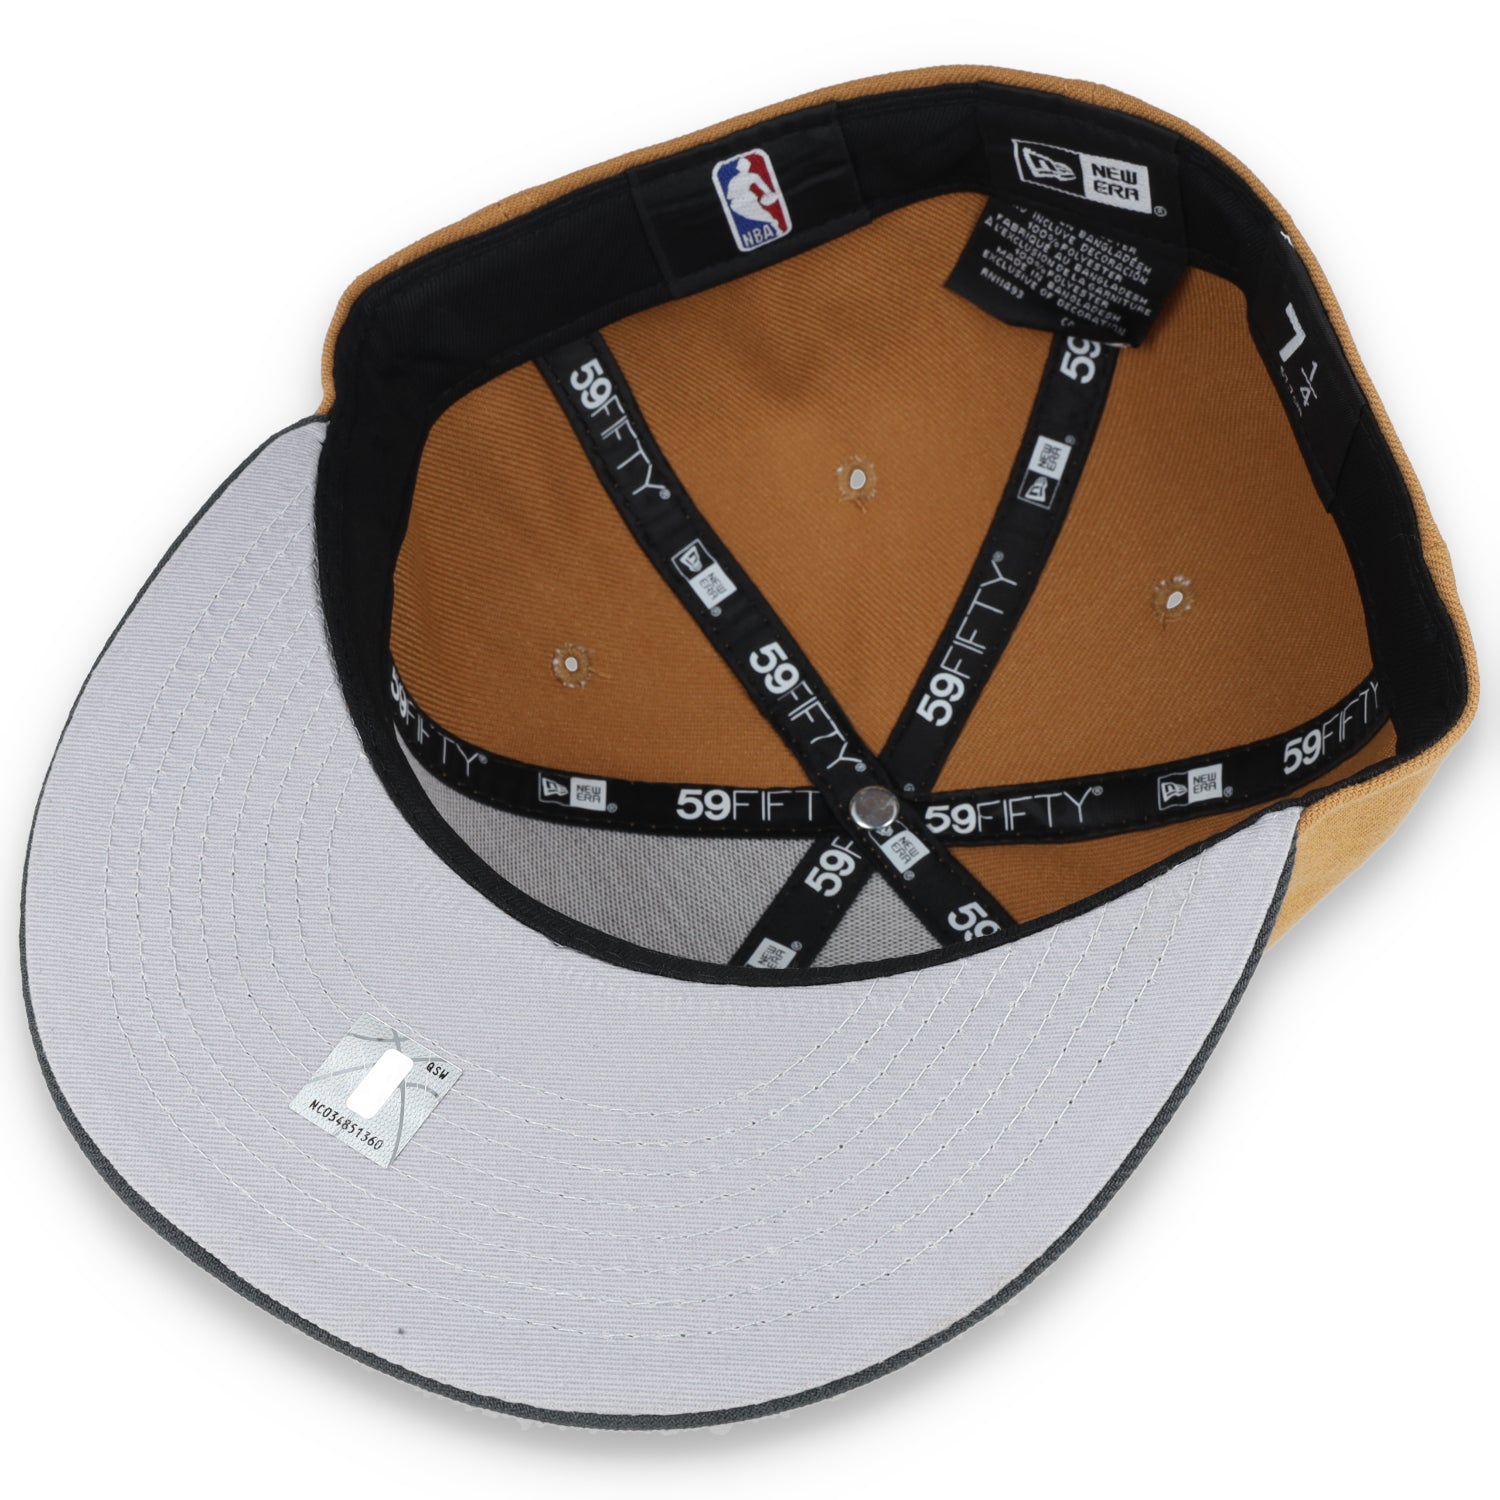 NEW ERA GOLDEN STATE WARRIORS COLOR PACK 2TONE 59FIFTY FITTED HAT- TAN/GREY